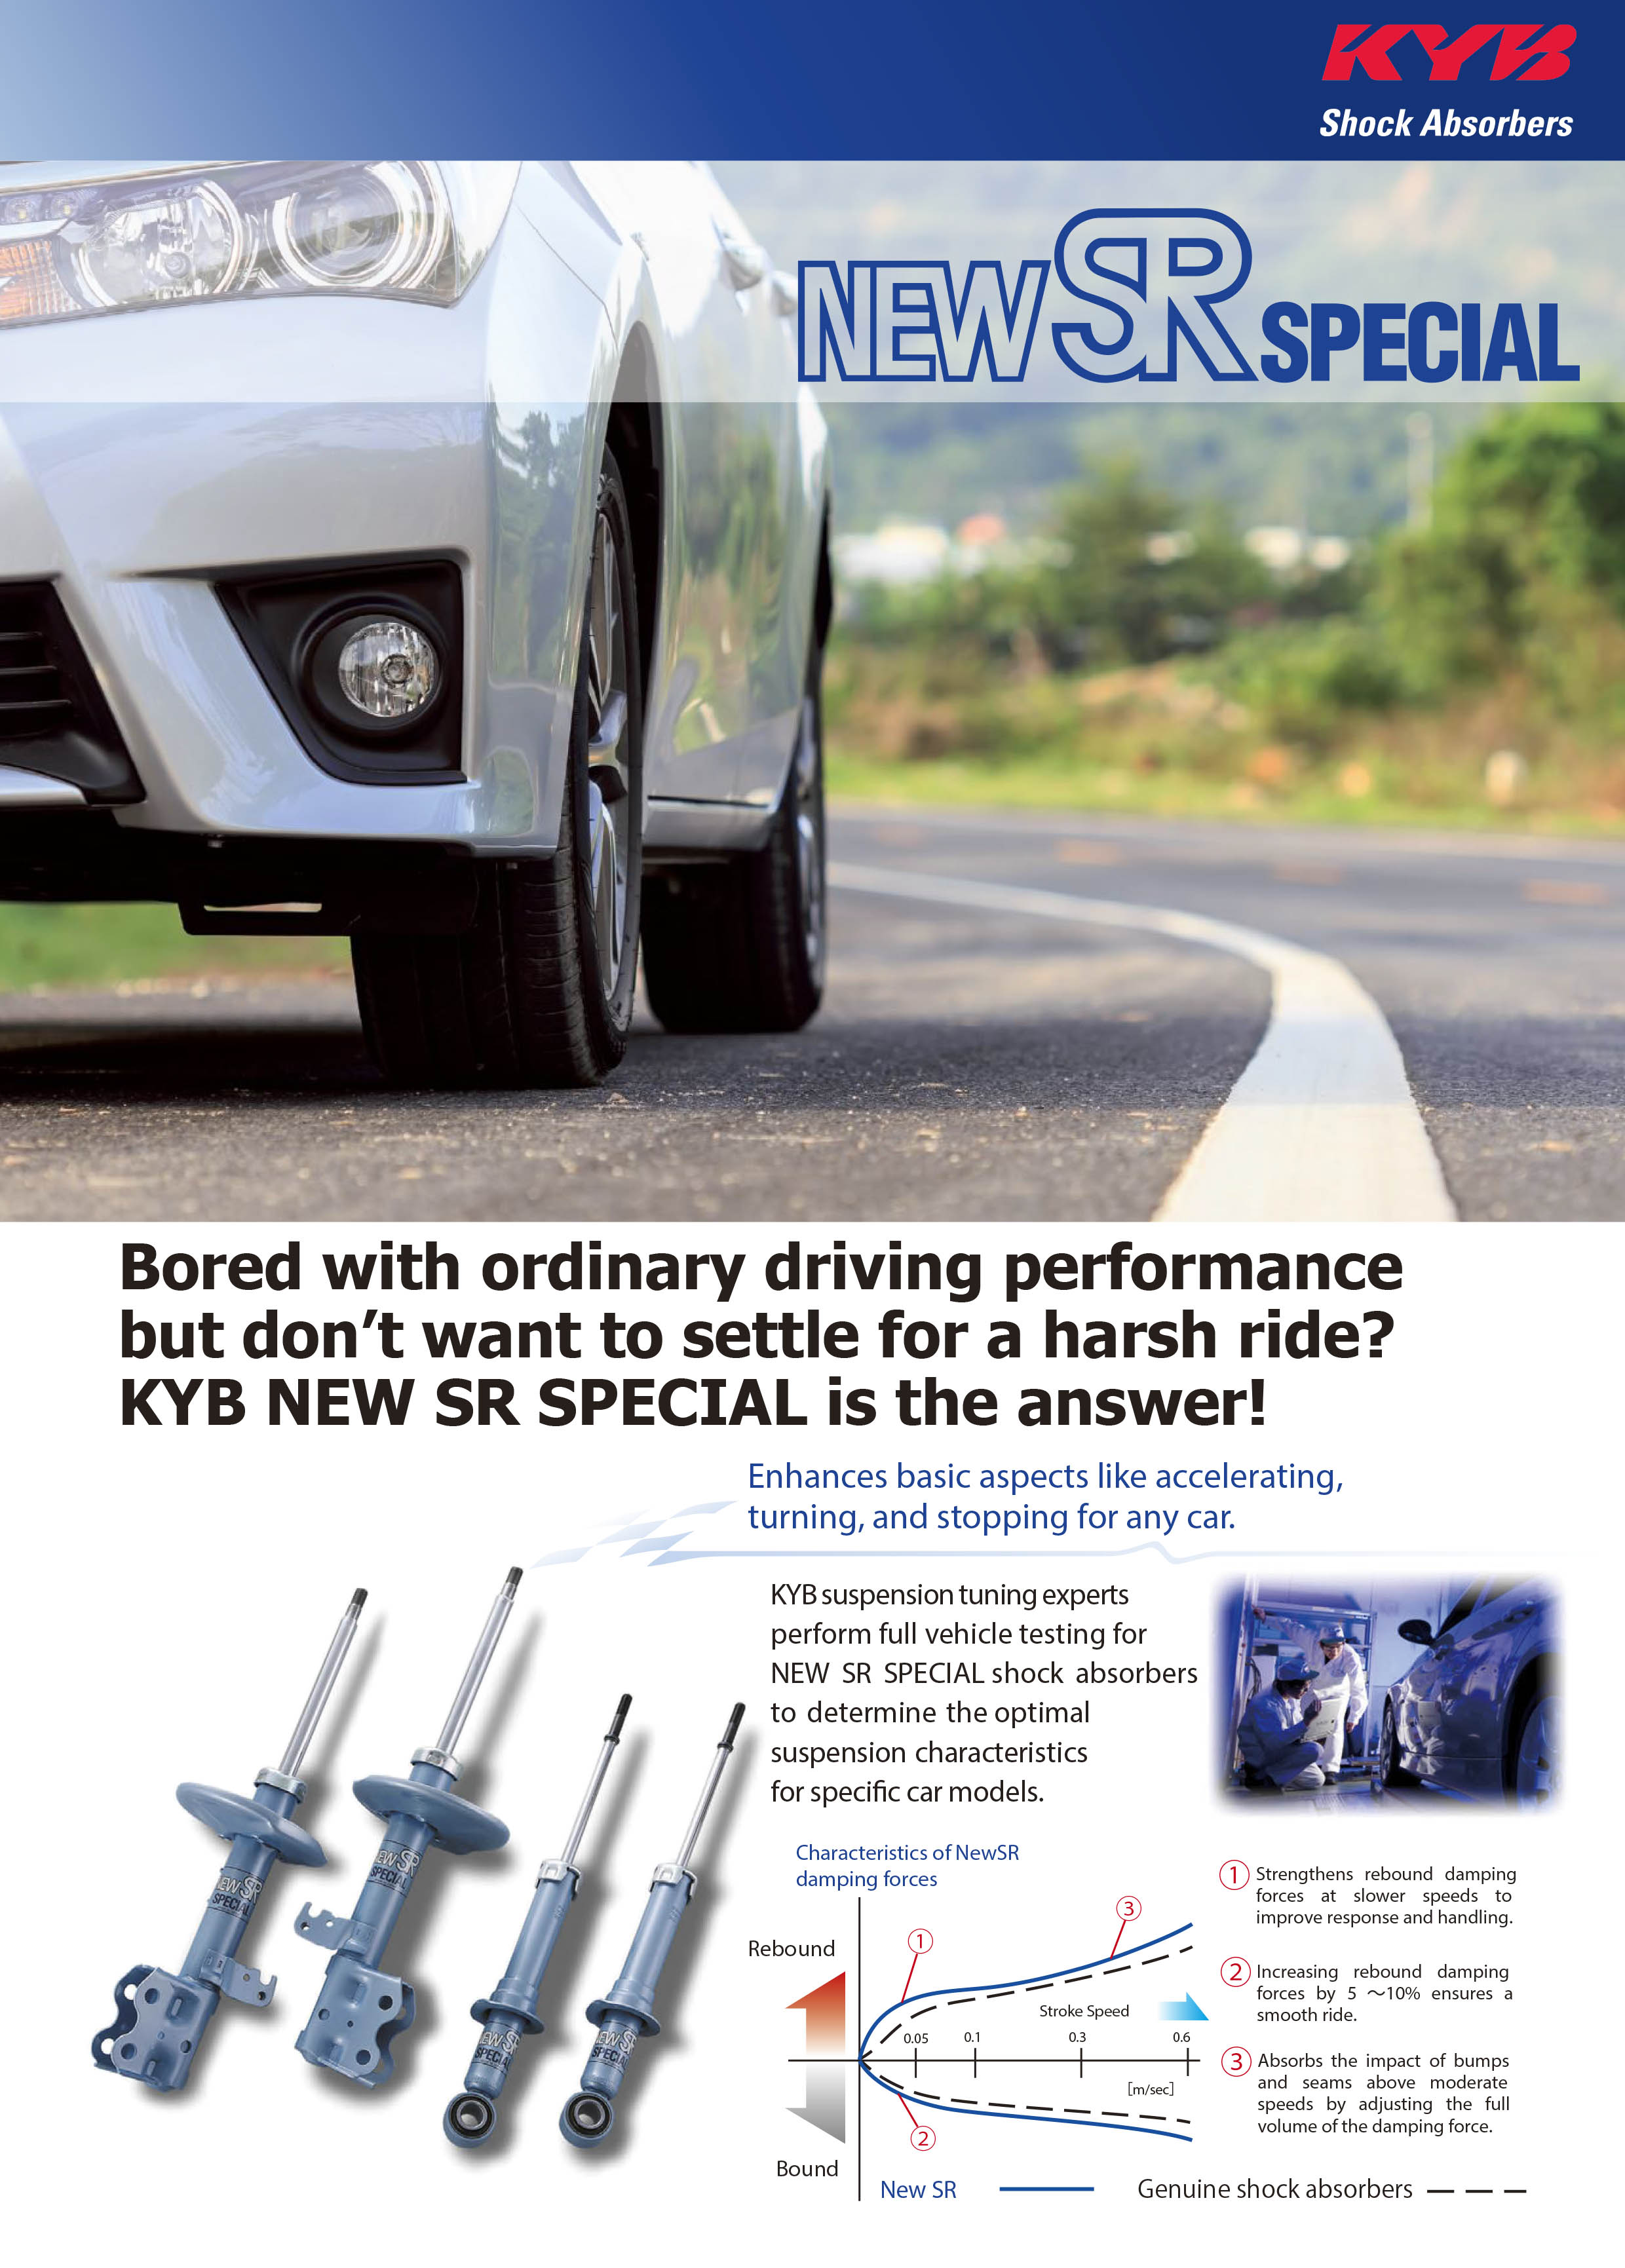 KYB launch New SR Special range - KYB Shock Absorbers : KYB Shock Absorbers